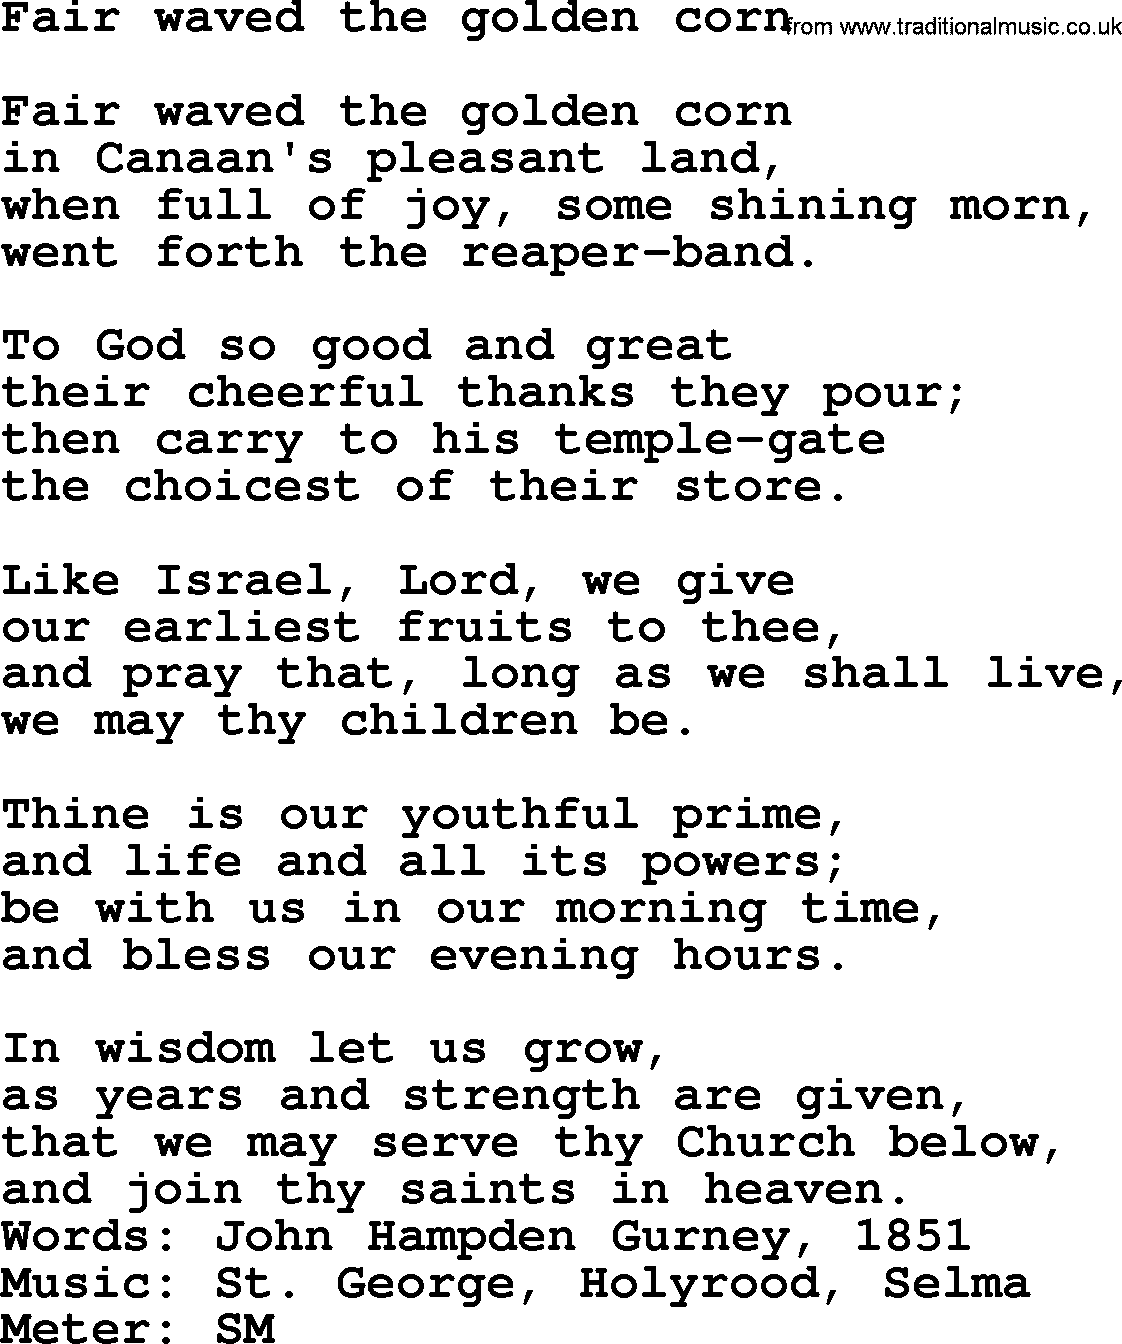 Thanksgiving Hymns and Songs: Fair Waved The Golden Corn lyrics with PDF